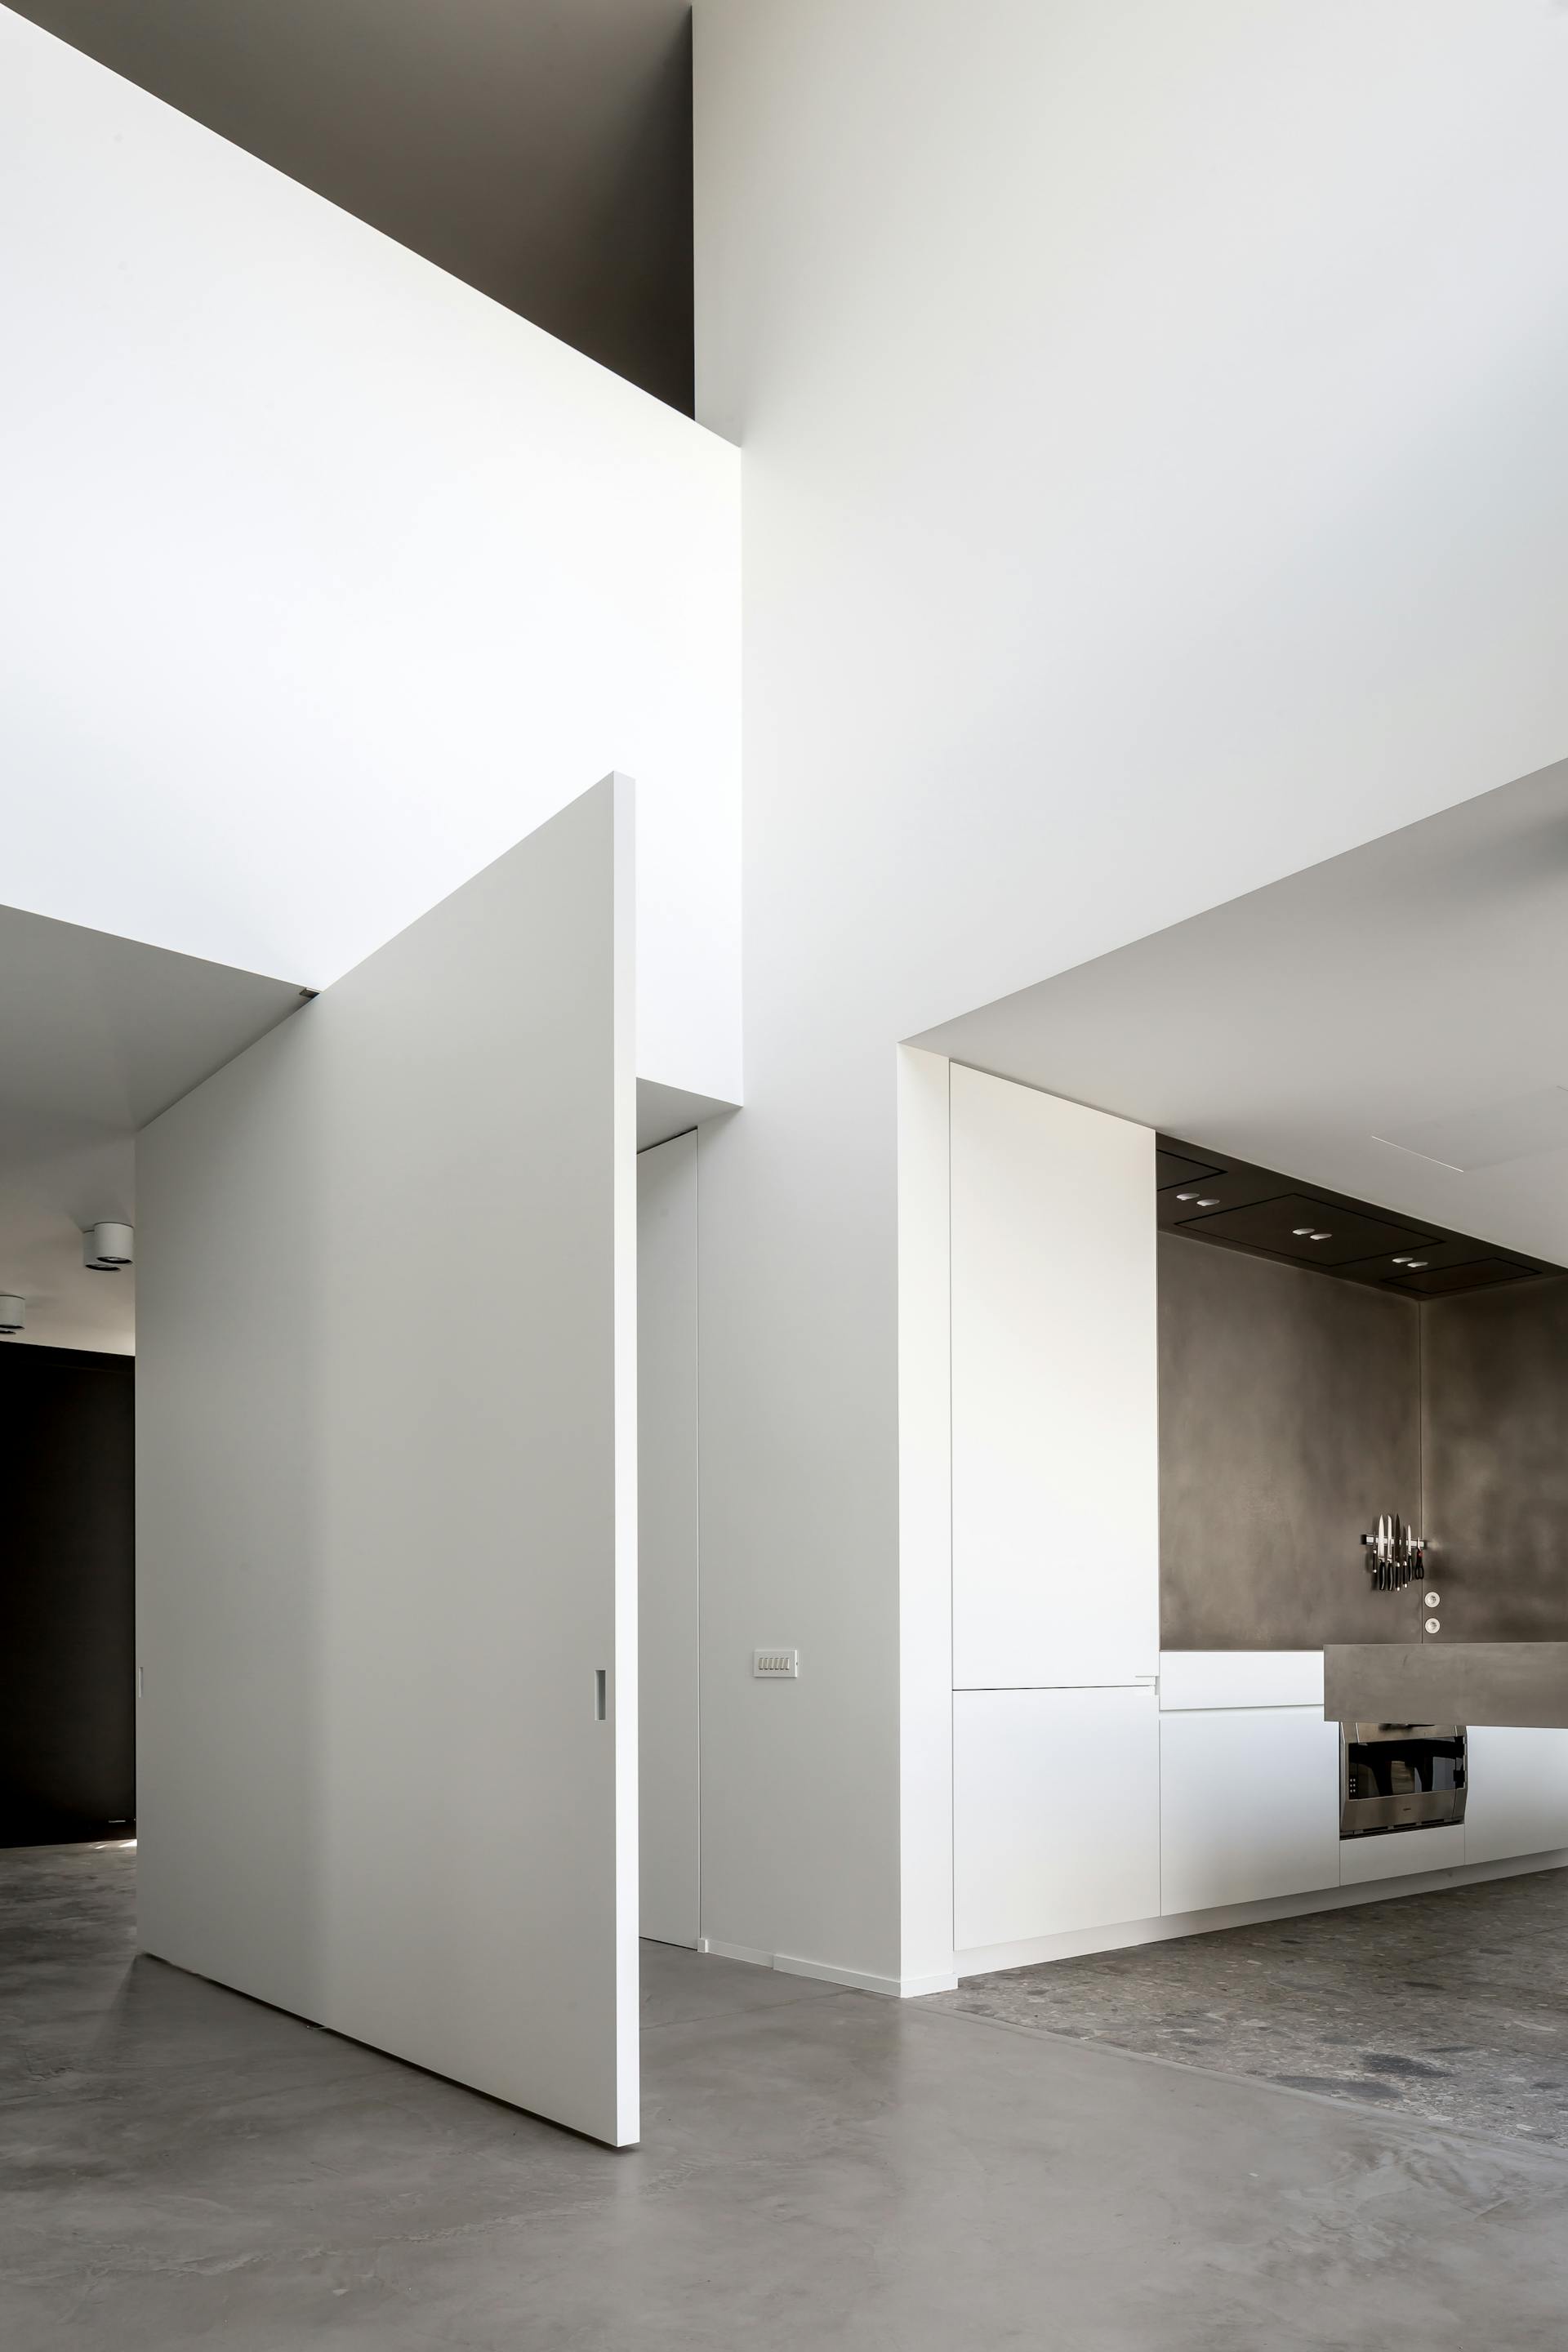 A huge white centrally pivoting door fully open in a large white space with concrete floor and kitchen worktops.